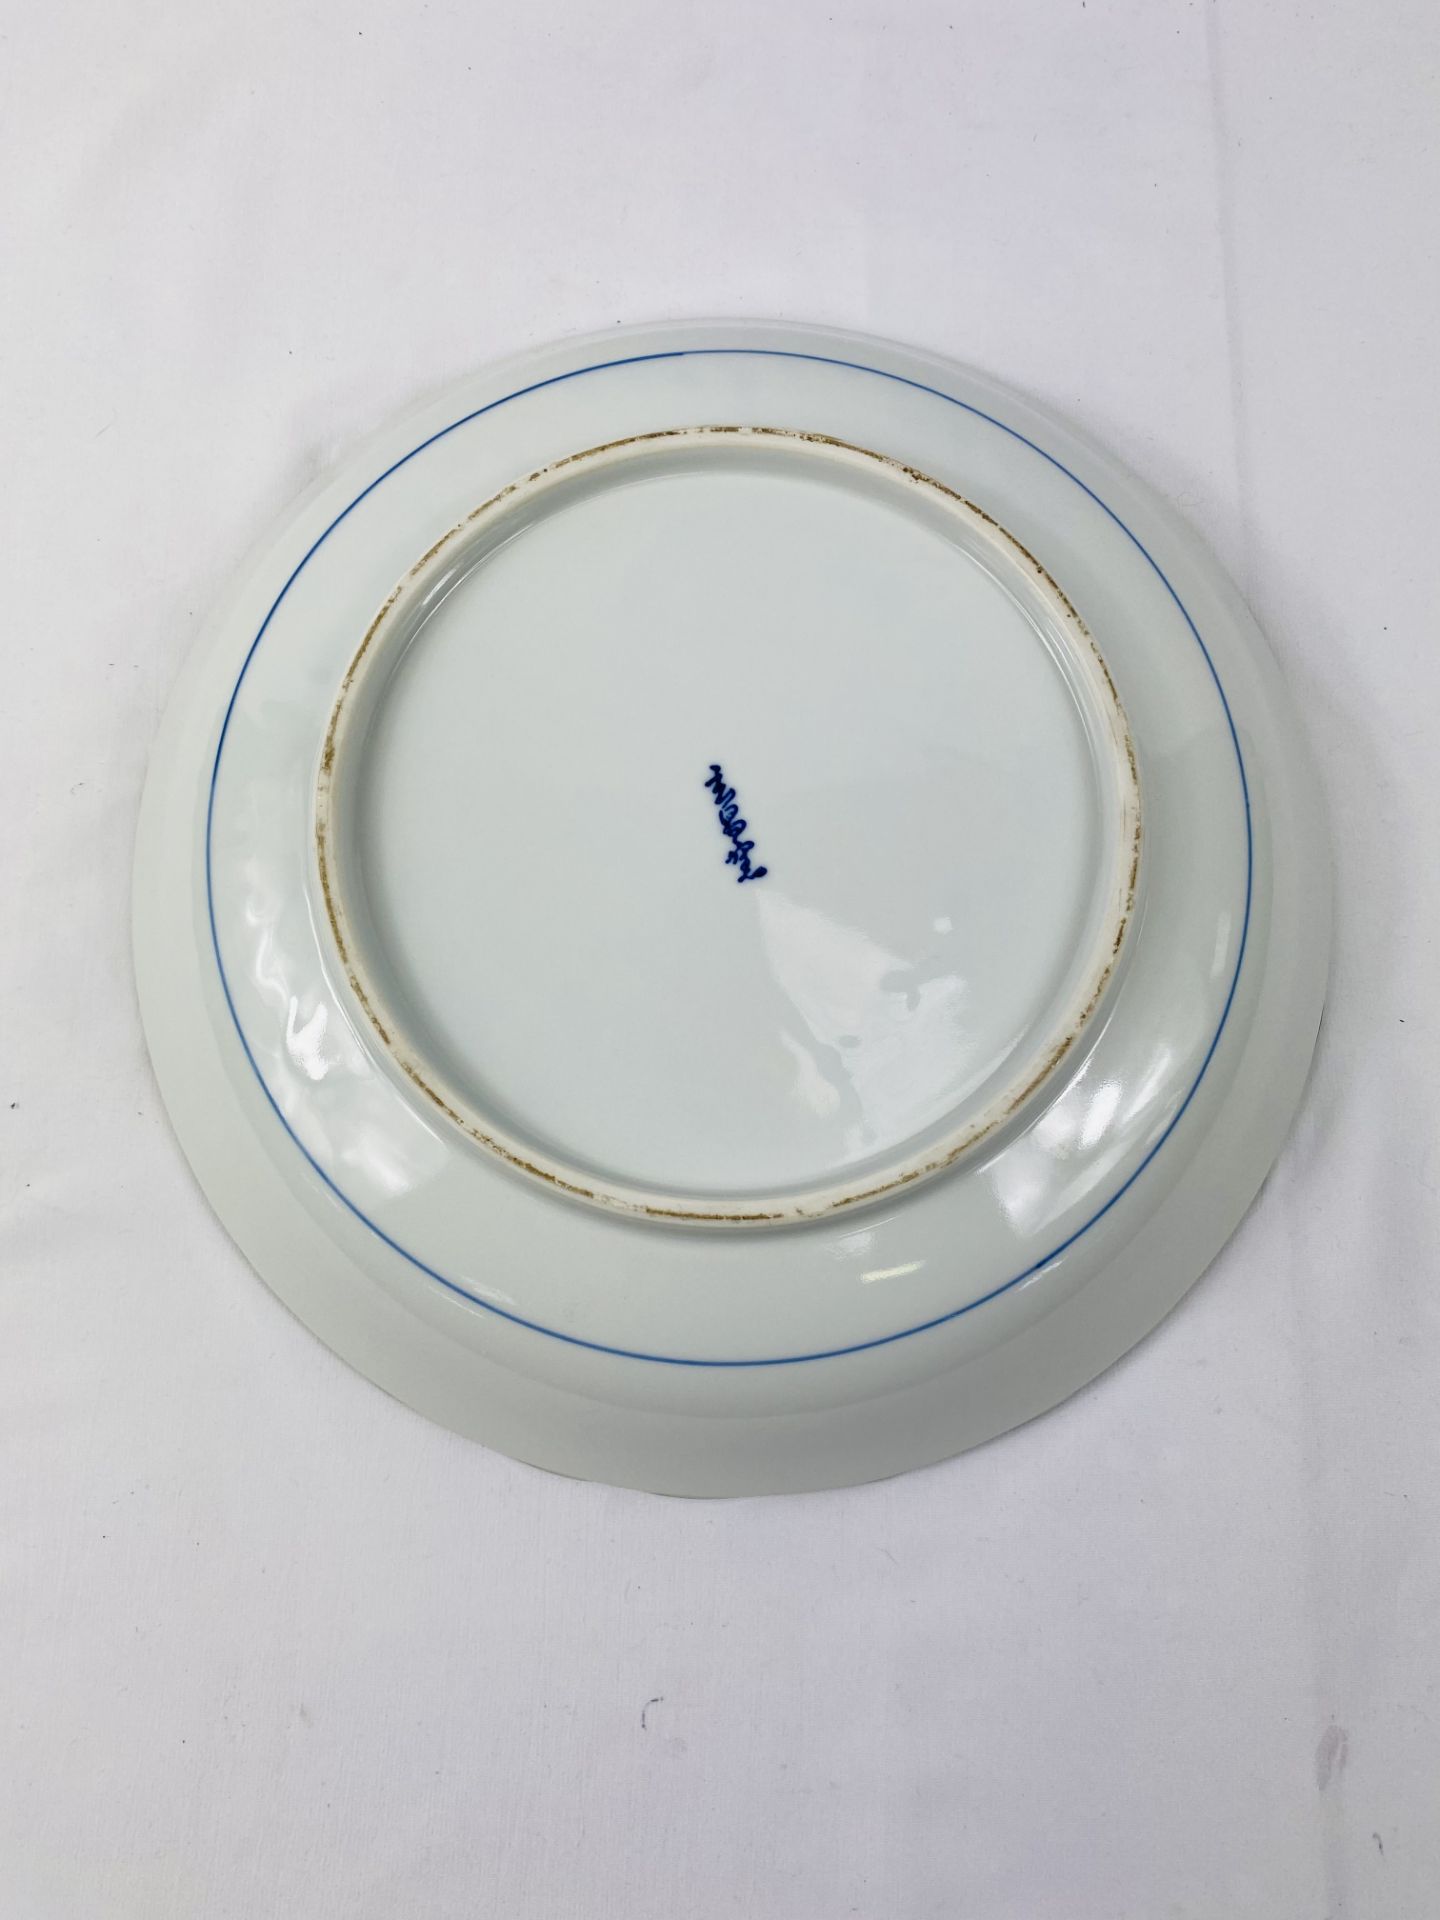 20th century Chinese blue and white dish - Image 4 of 4